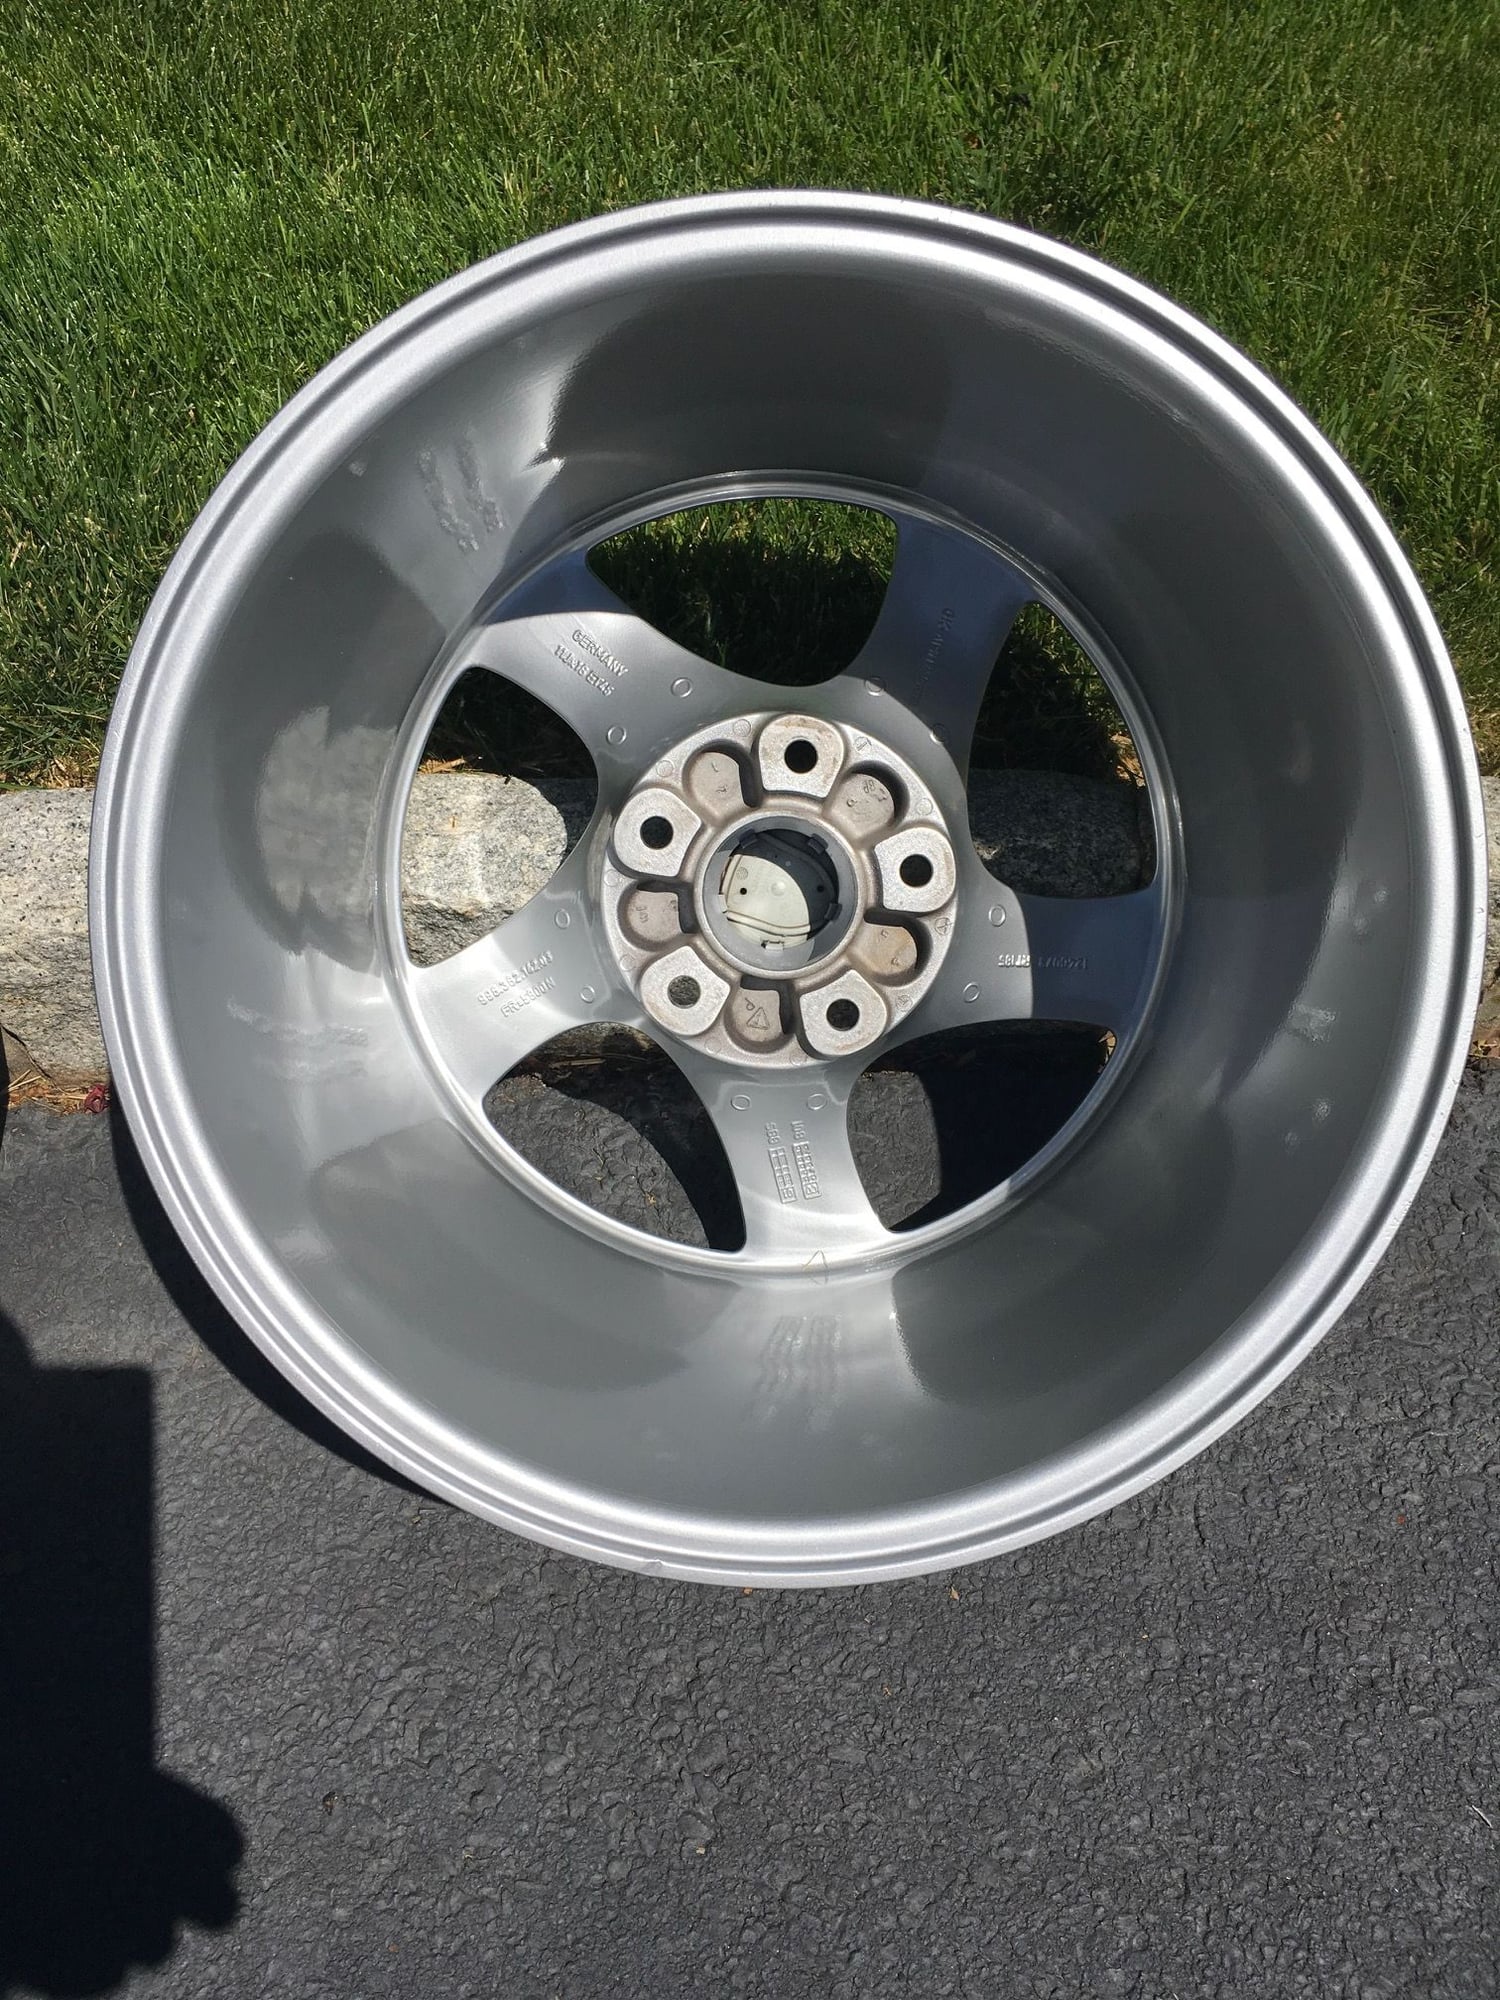 Wheels and Tires/Axles -  - Used - 1996 to 2005 Porsche 911 - Hillsborough, NJ 08844, United States